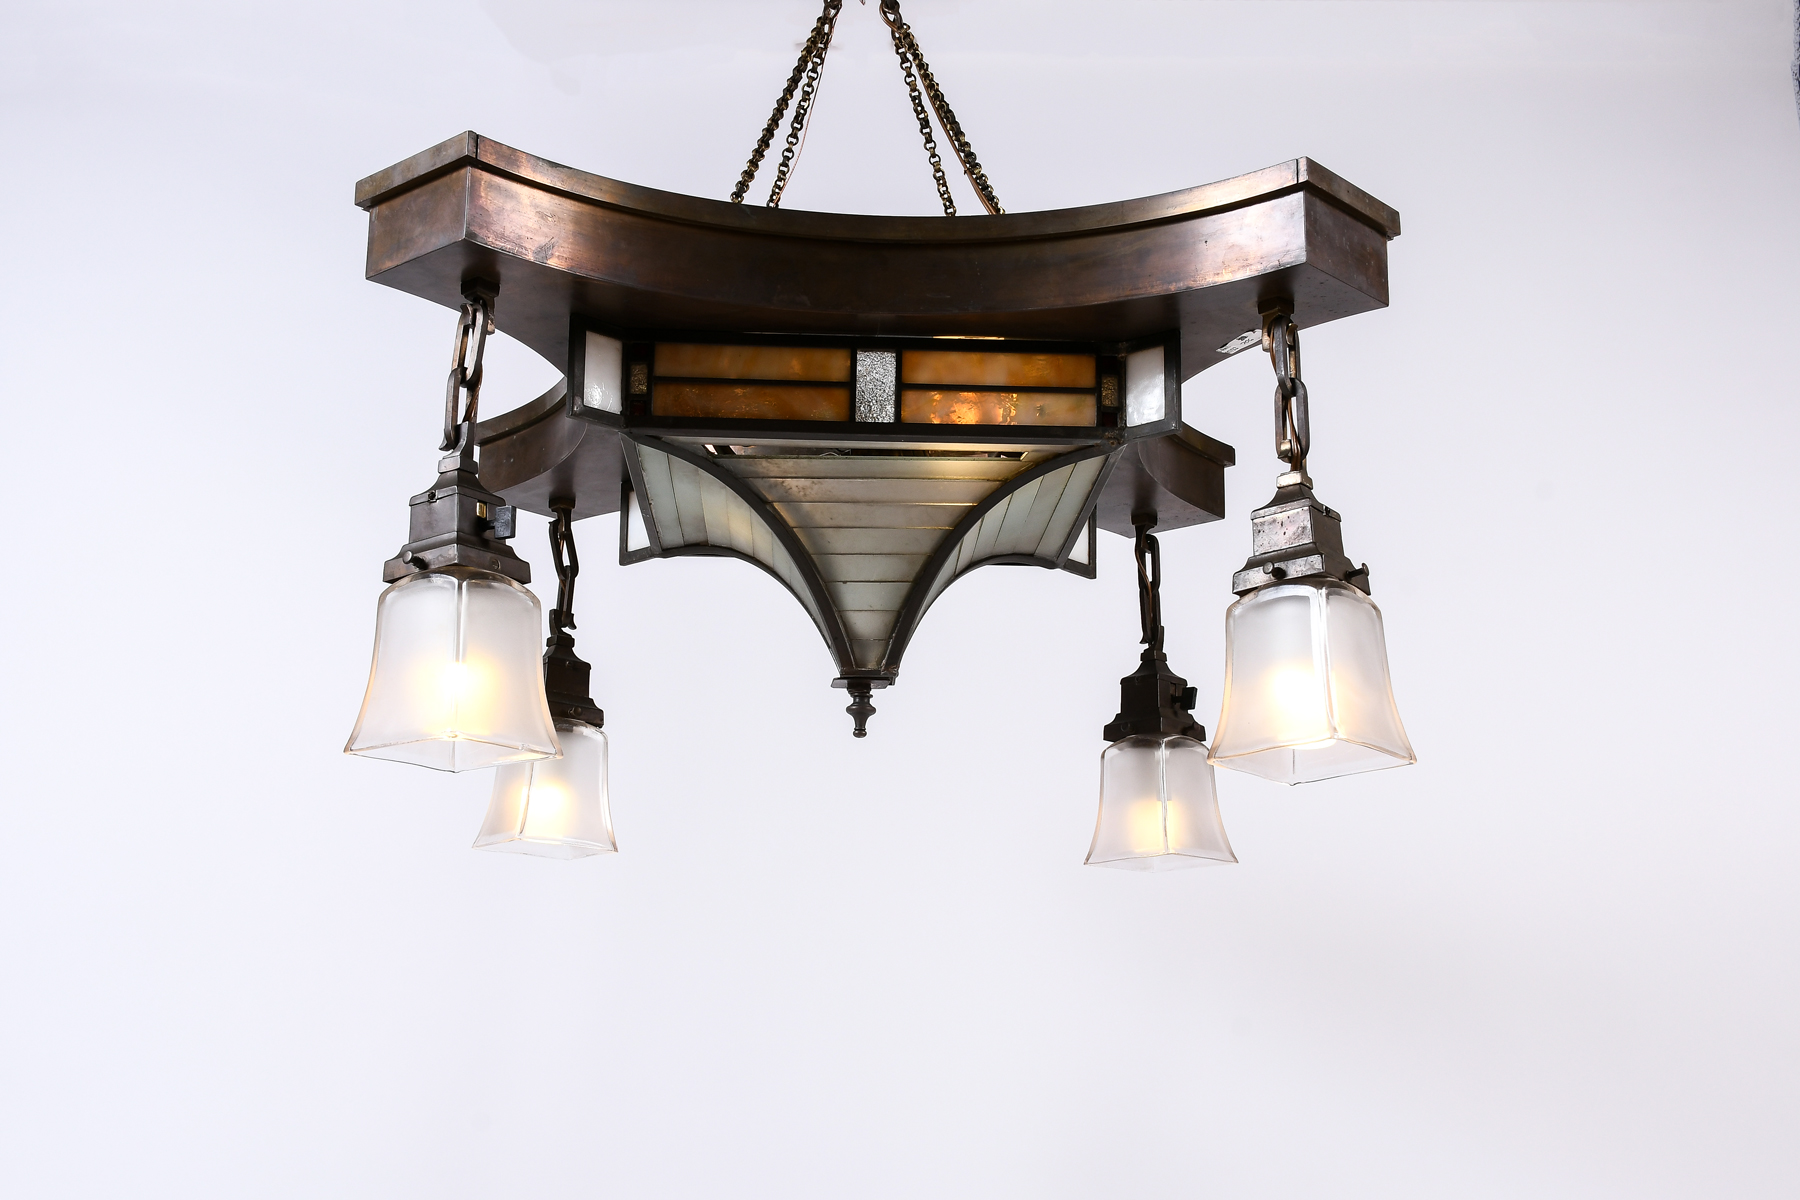 5 LIGHT CHANDELIER W CURVED PANELS  36a470